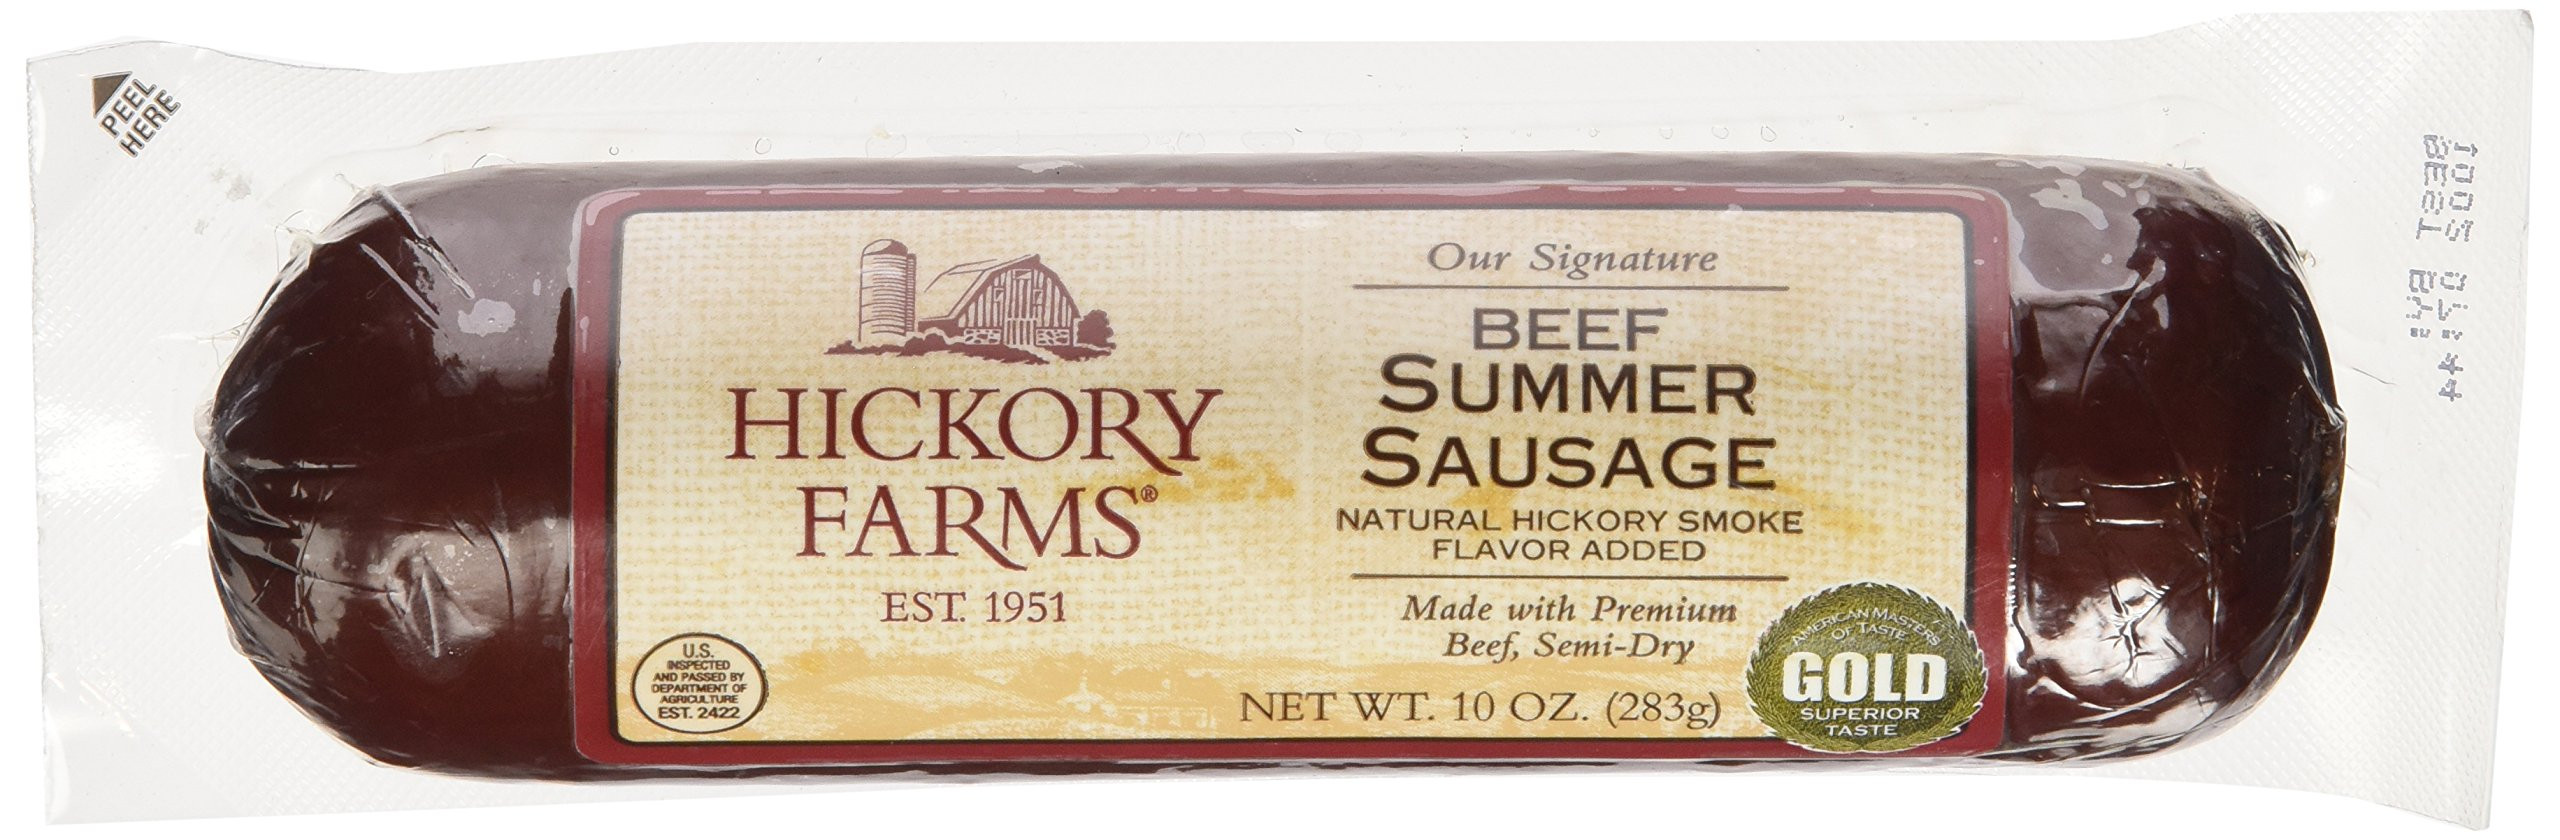 Hickory Farms Beef Summer Sausage
 Amazon Hickory Farms Peppermint Snow Mints 10 Oz